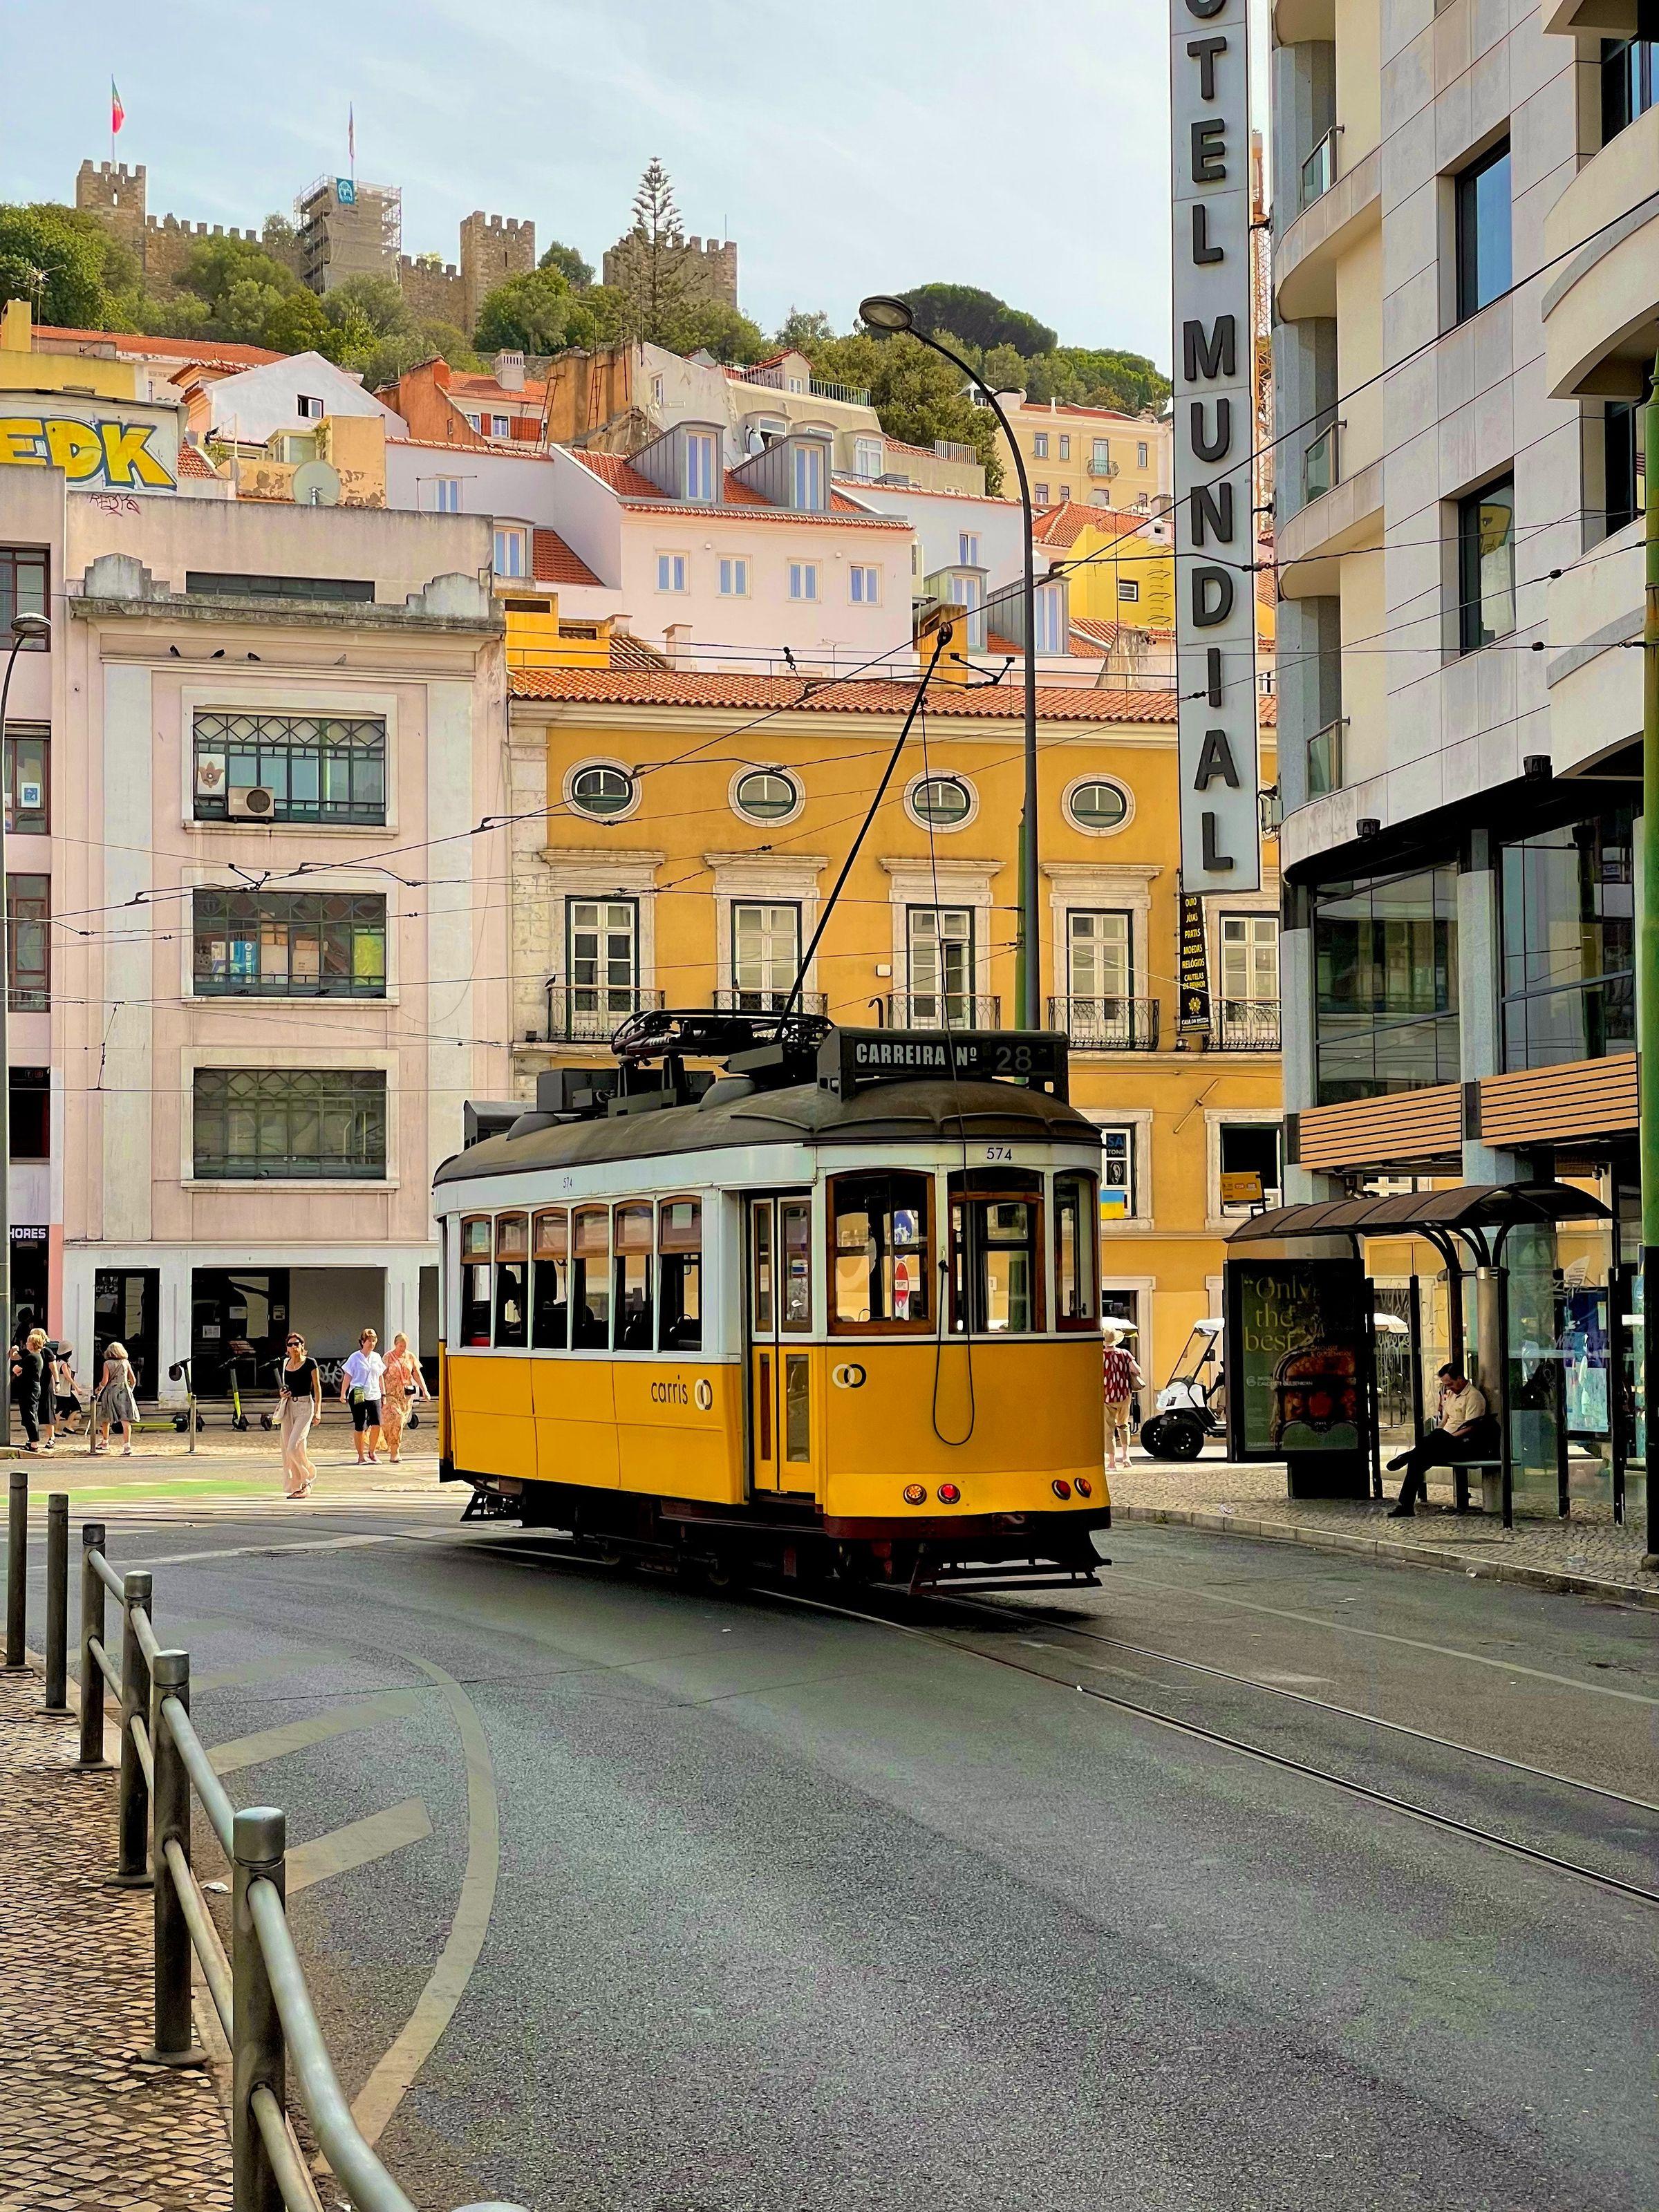 representative image of Lisbon. Yellow tram on the tracks on a street in Lisbon, on a sunny day